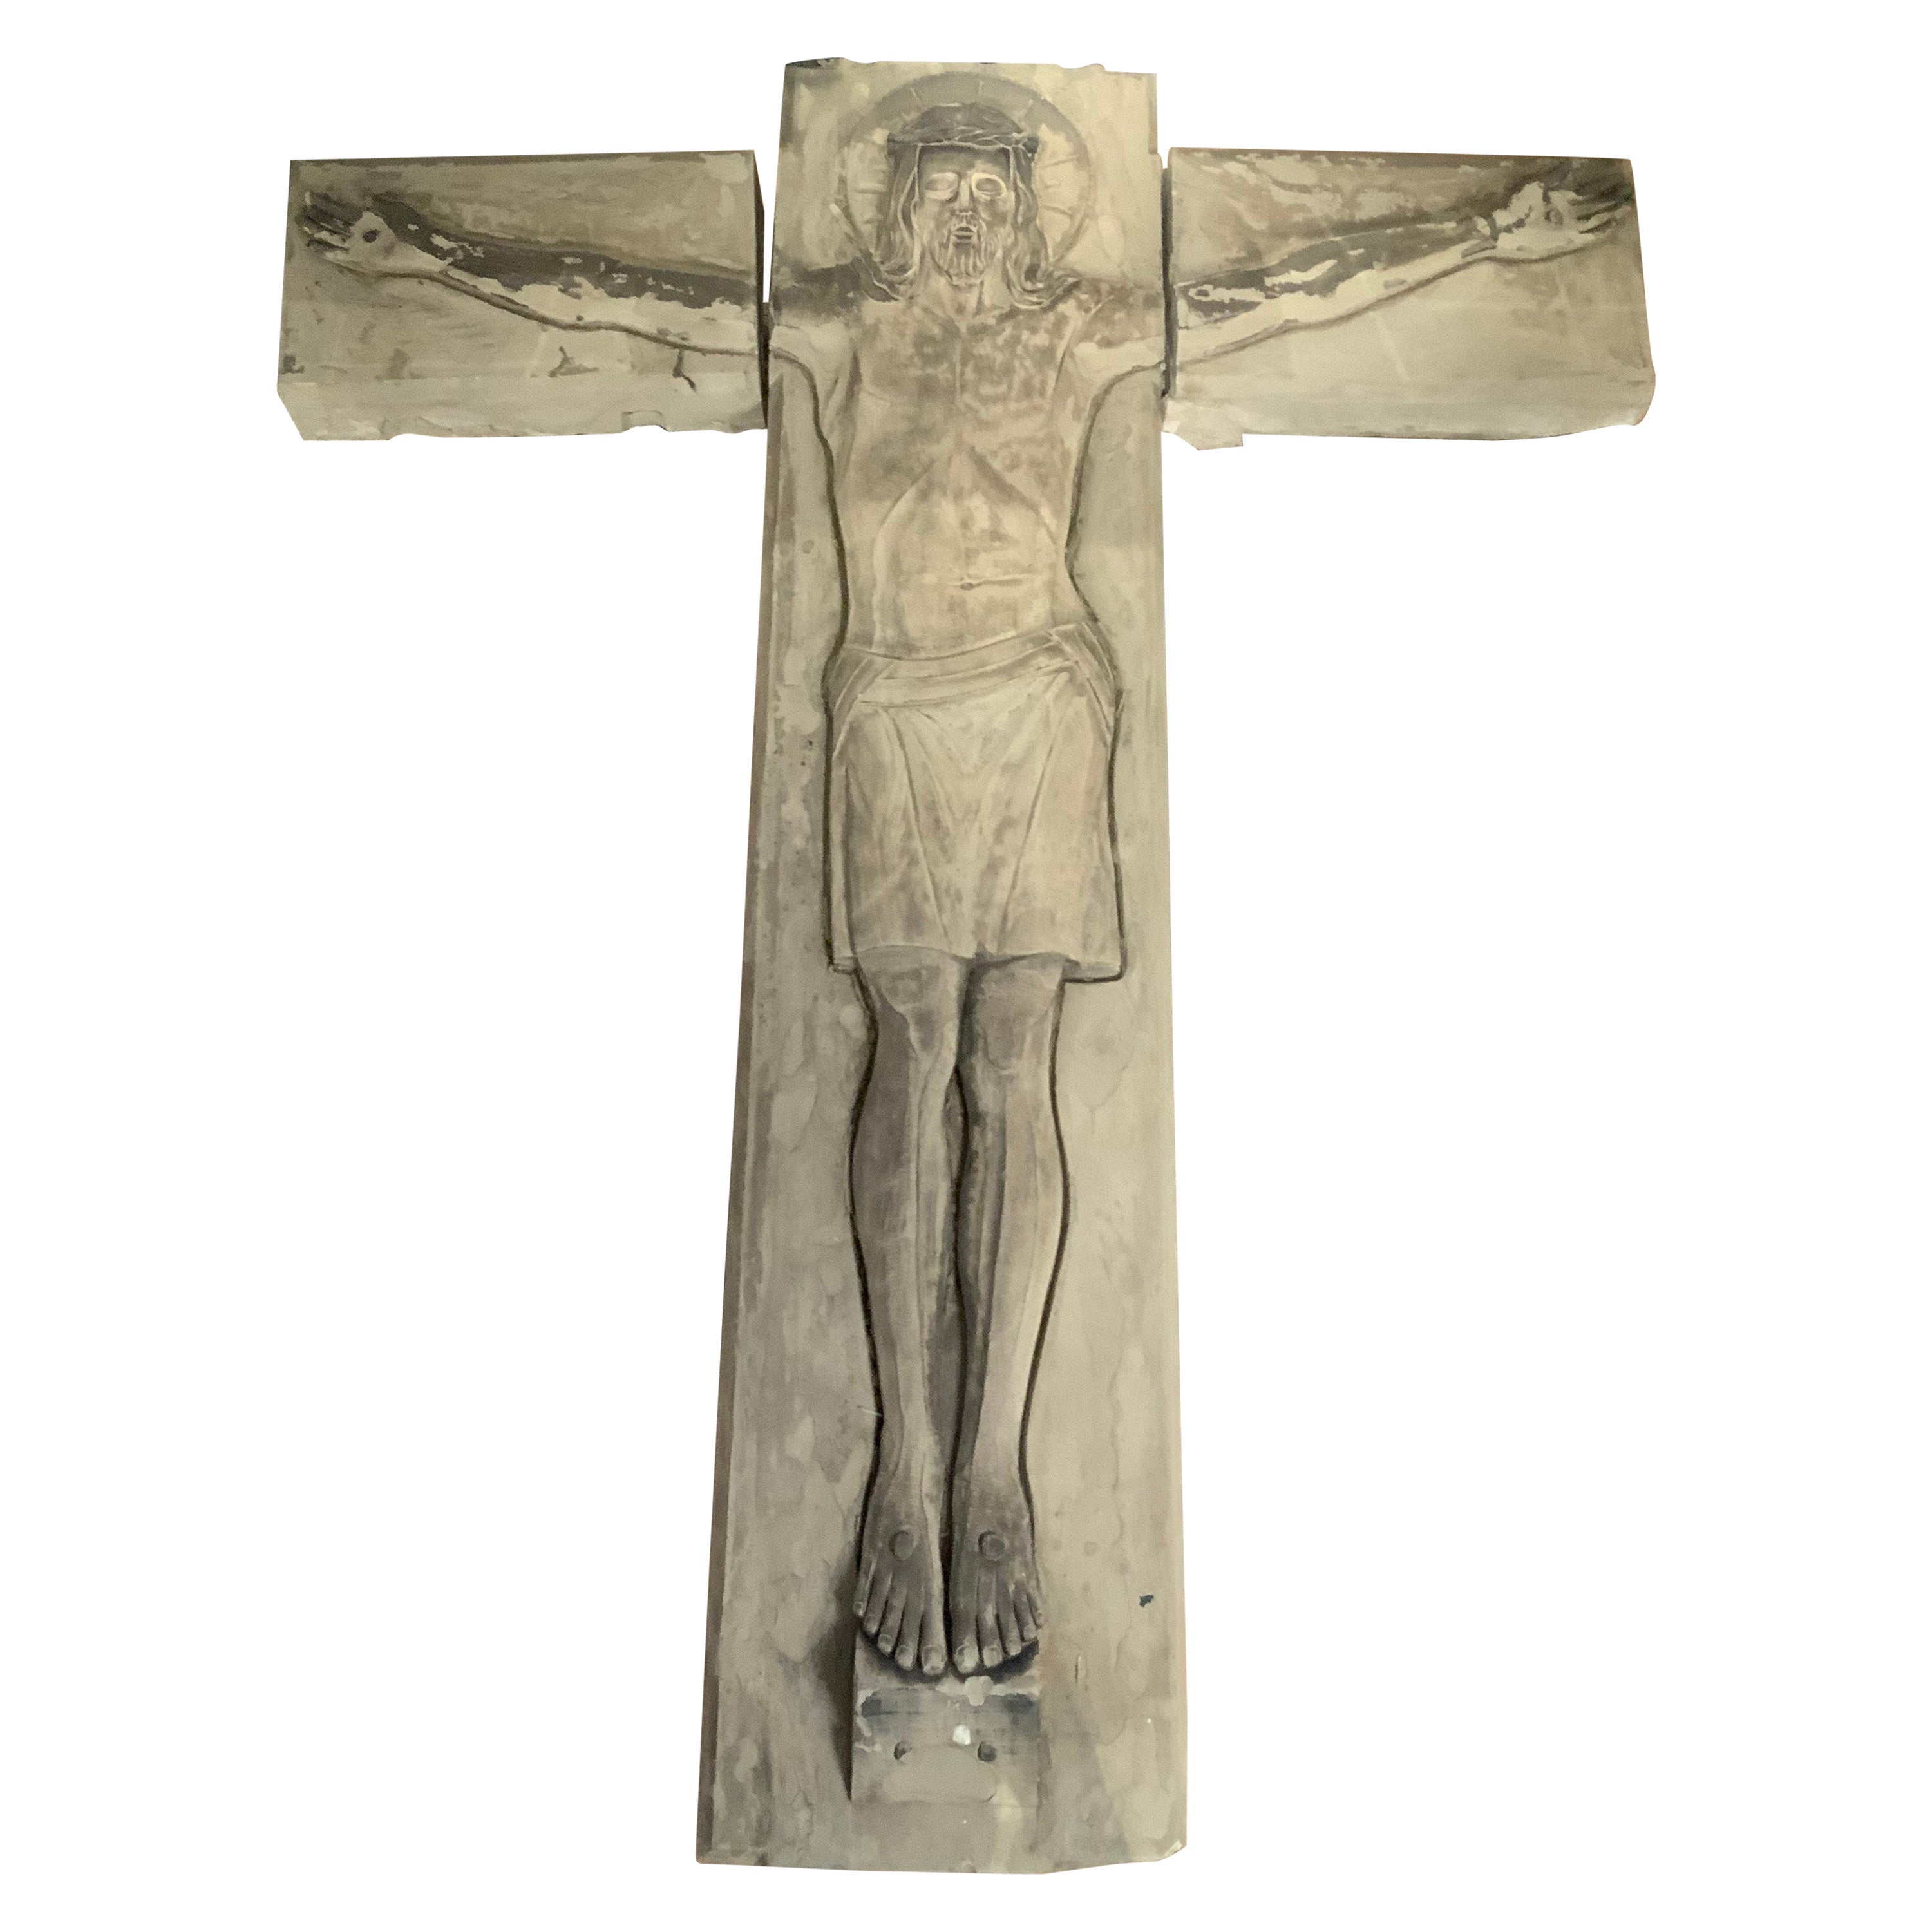 Life Sized Carved Sandstone Architectural Figure of Christ